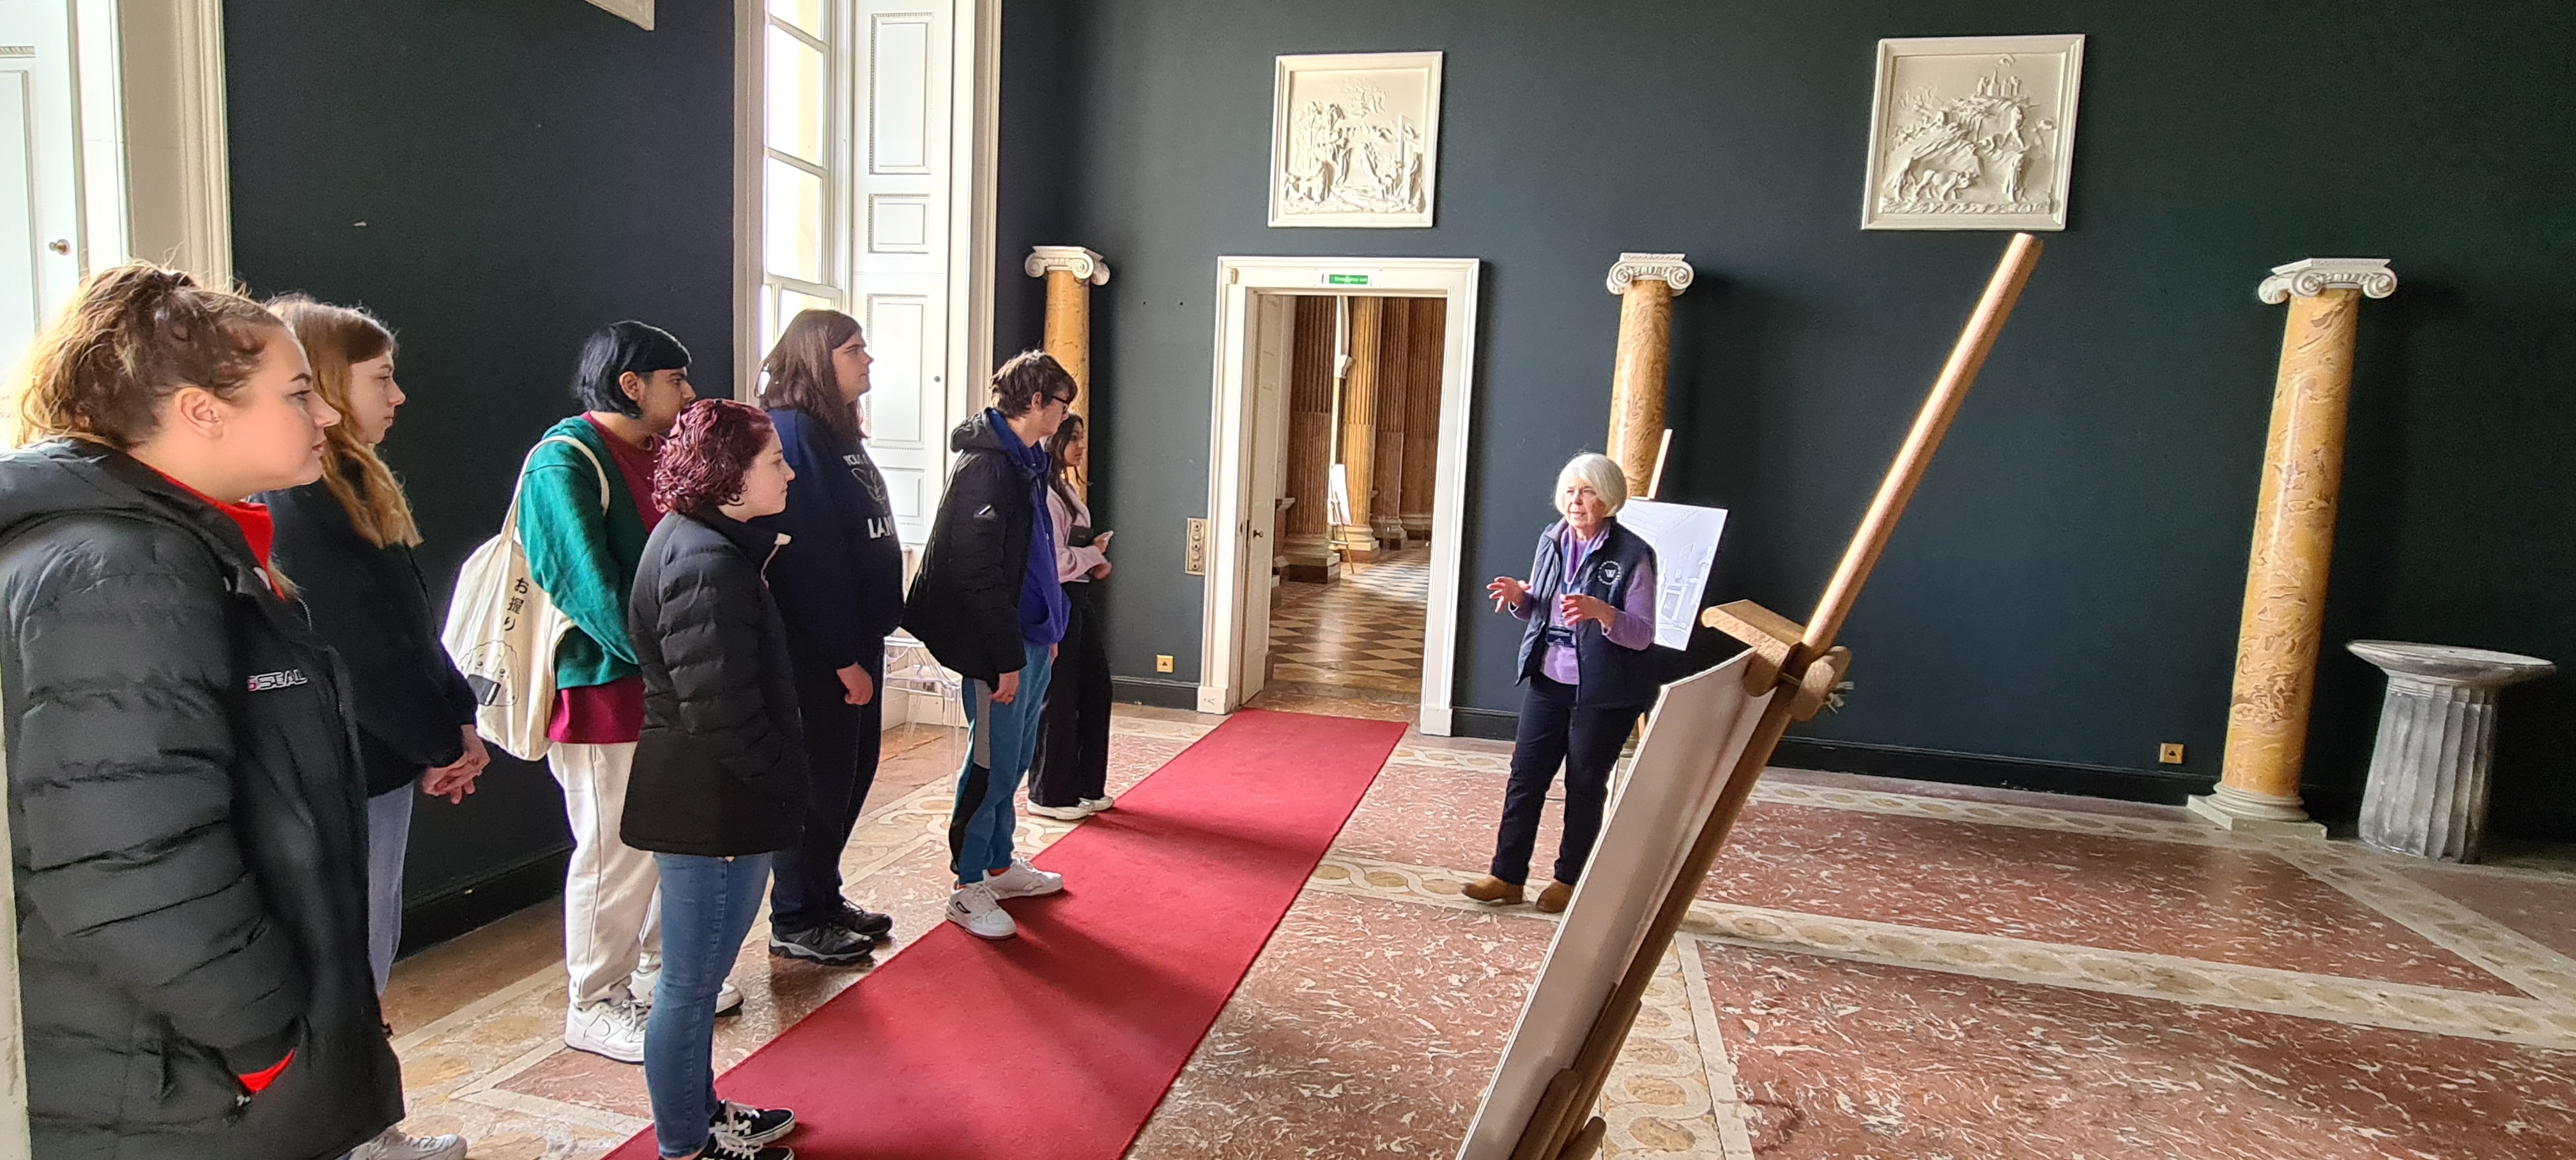 A group of young people stand inside Wentworth Woodhouse's room, led by a tour guide.